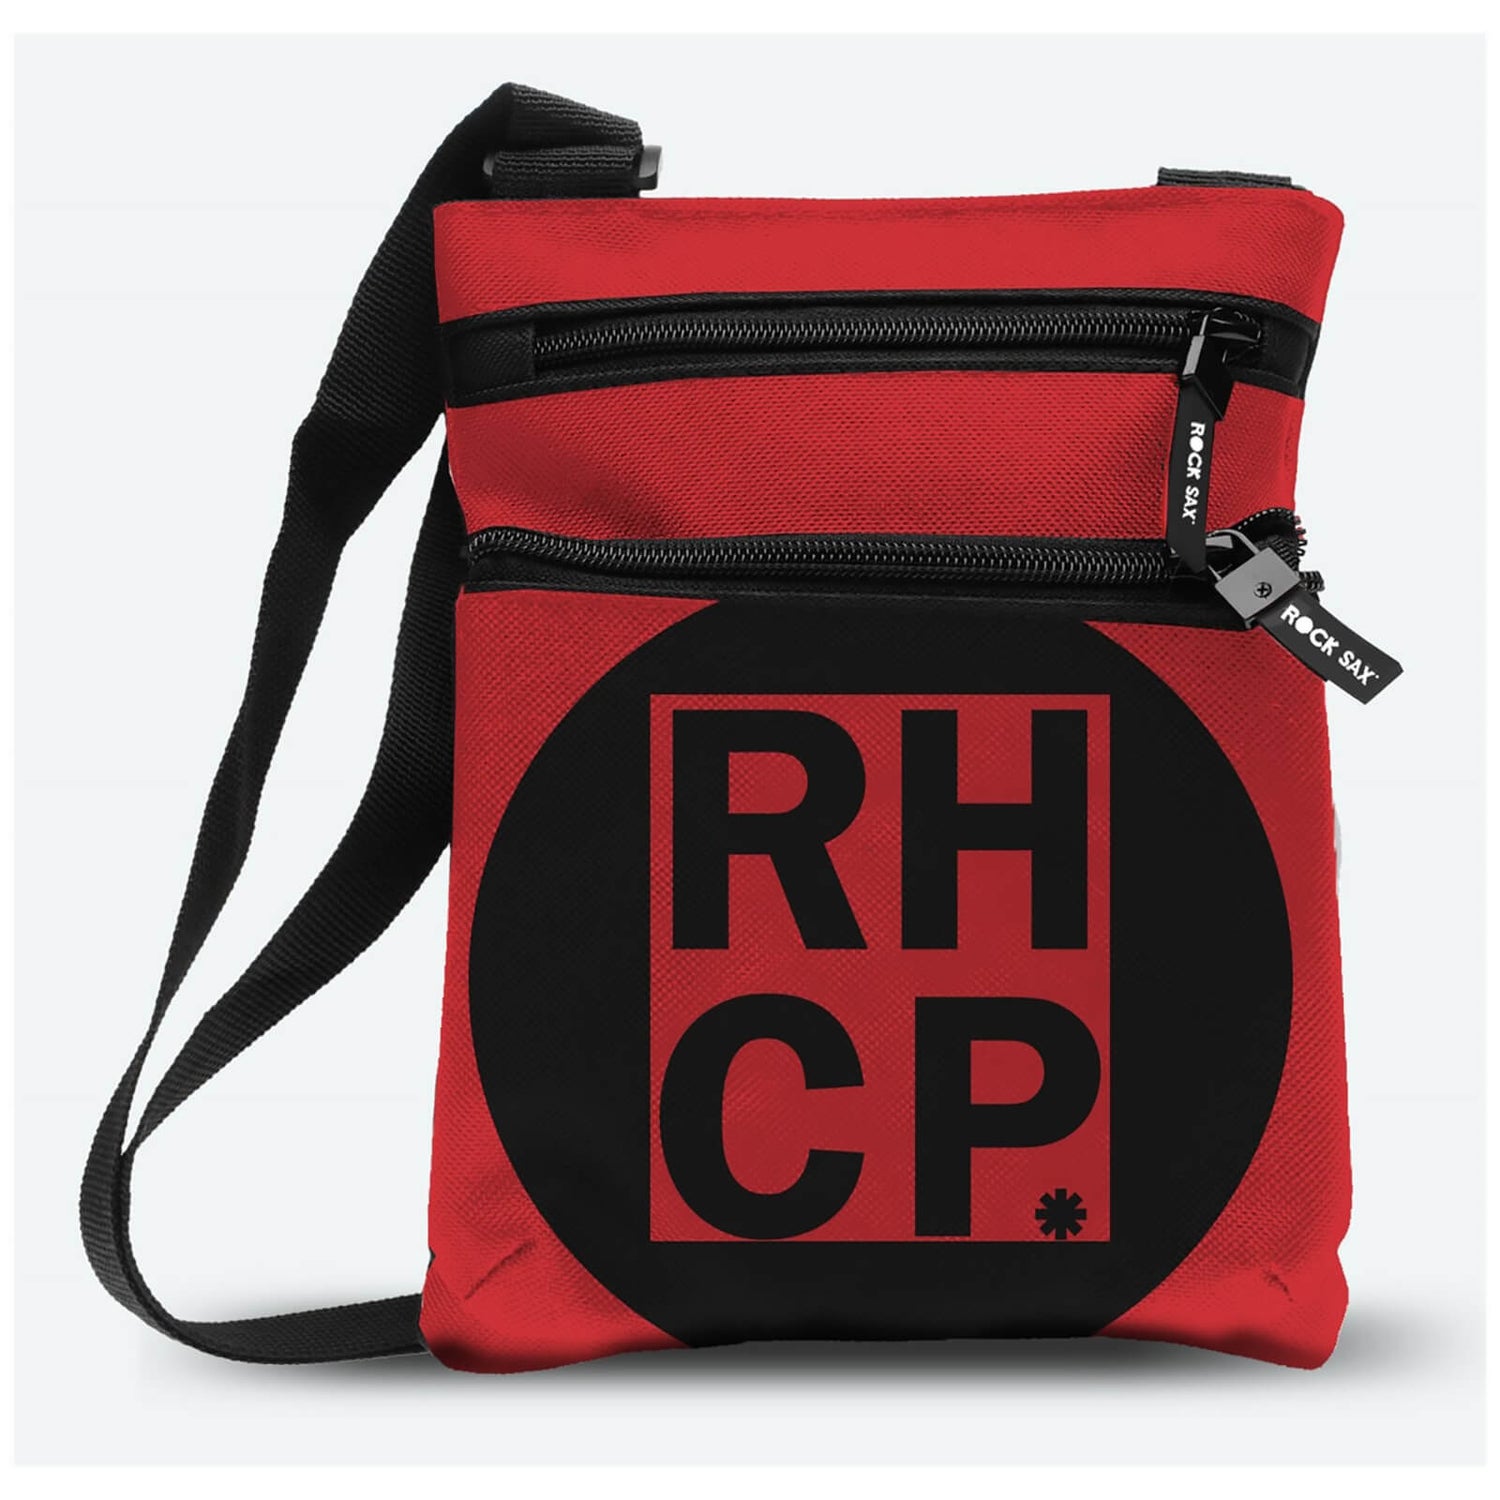 Rocksax Red Hot Chili Peppers Red Square Body Bag